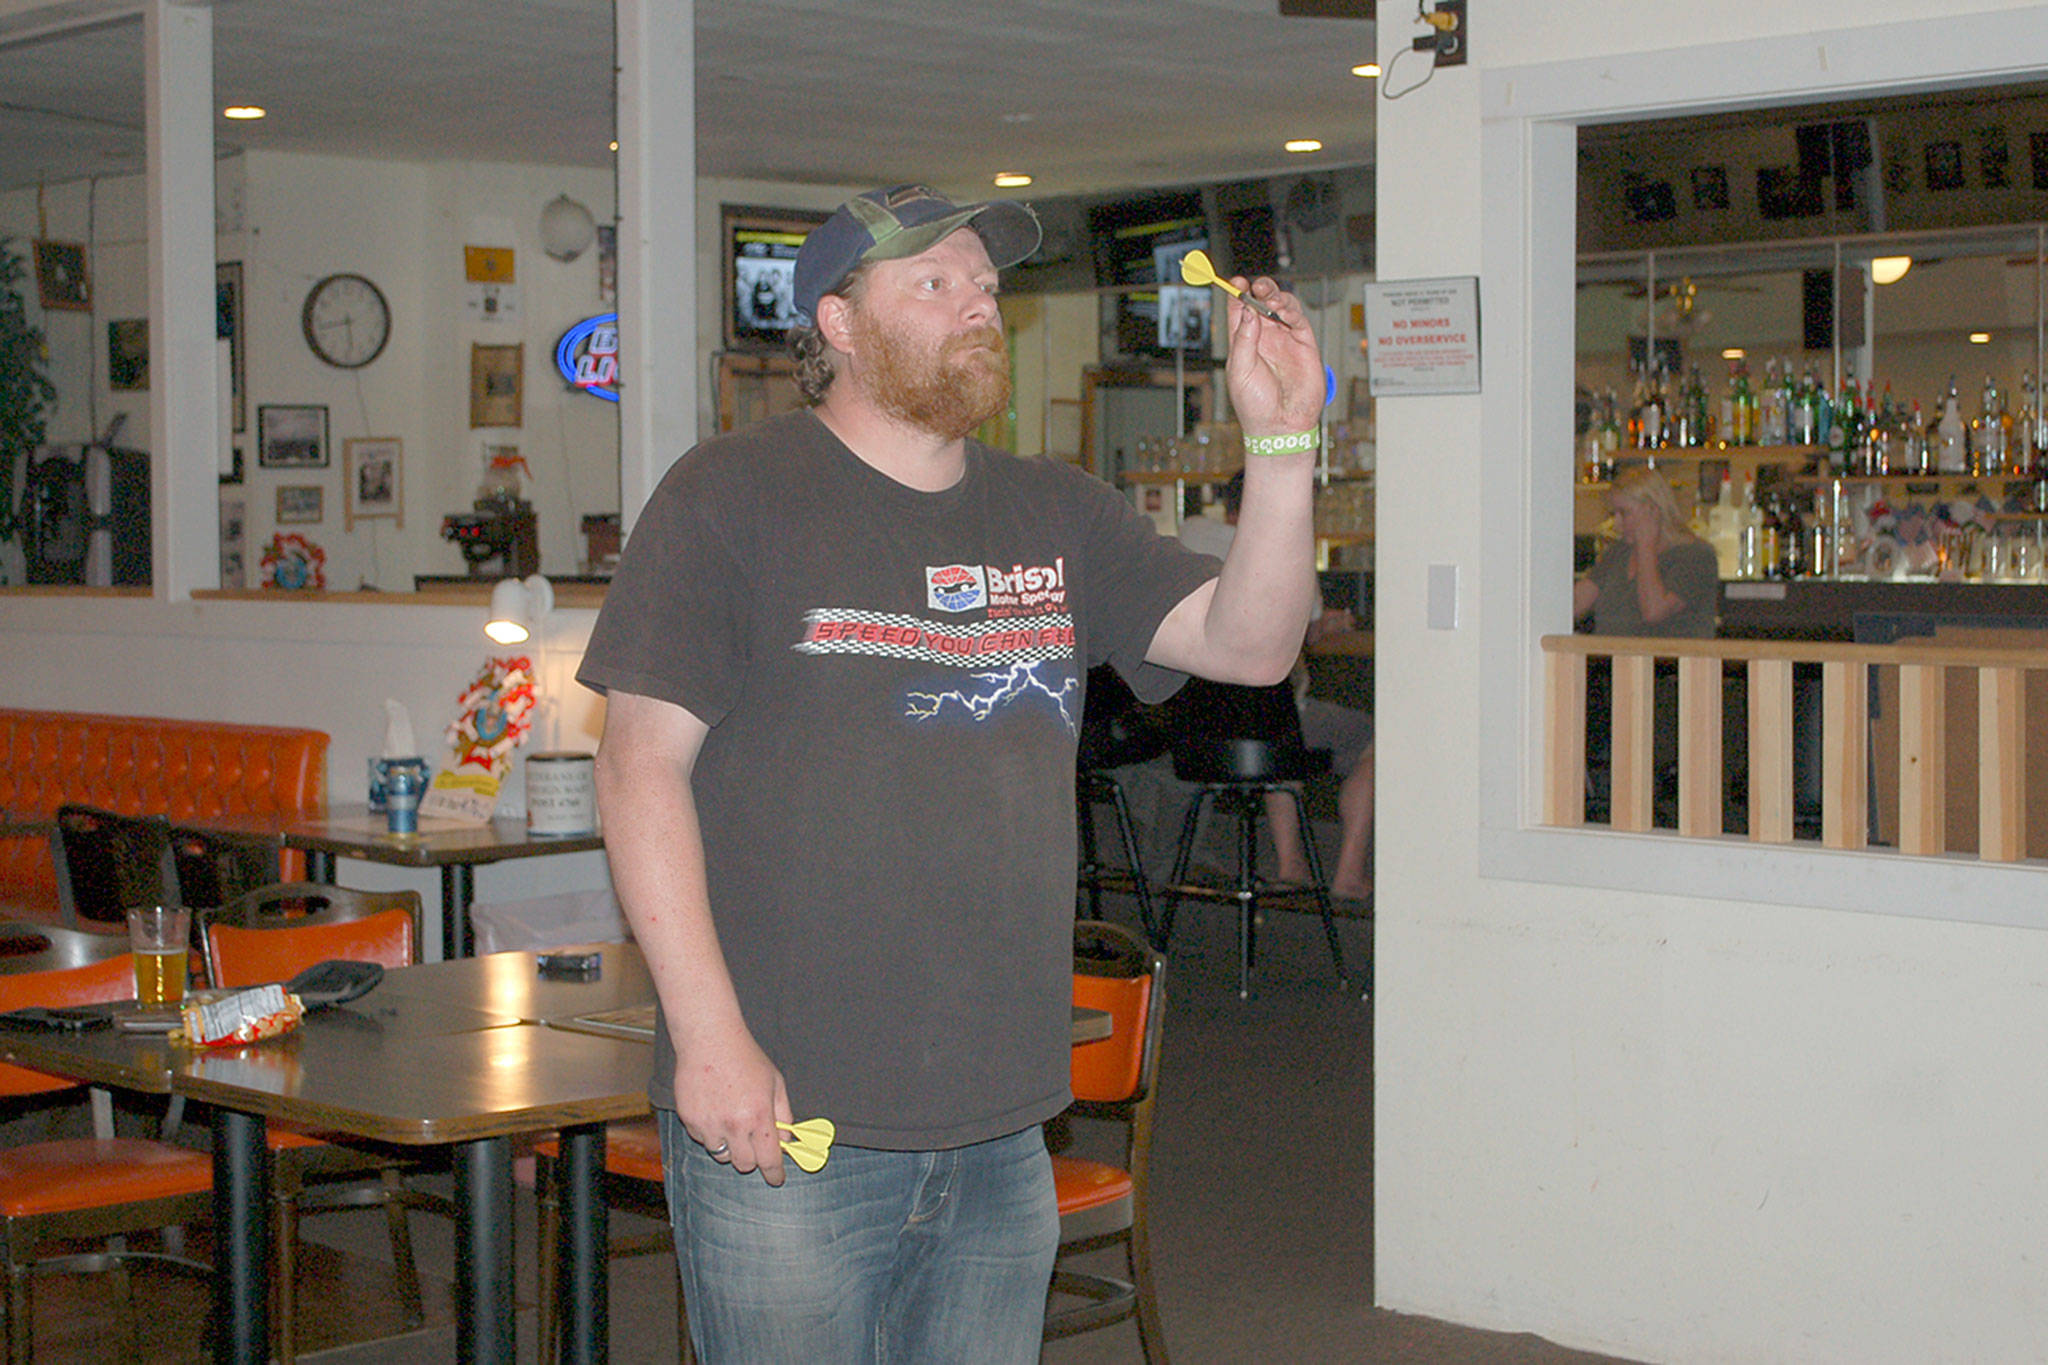 Jimmy Shaumburg lines up for his turn during Dart League at the Veterans of Foreign Wars Post 4760’s club bar and canteen room, one of several recreational activities offered at the facility. Sequim Gazette photo by Erin Hawkins